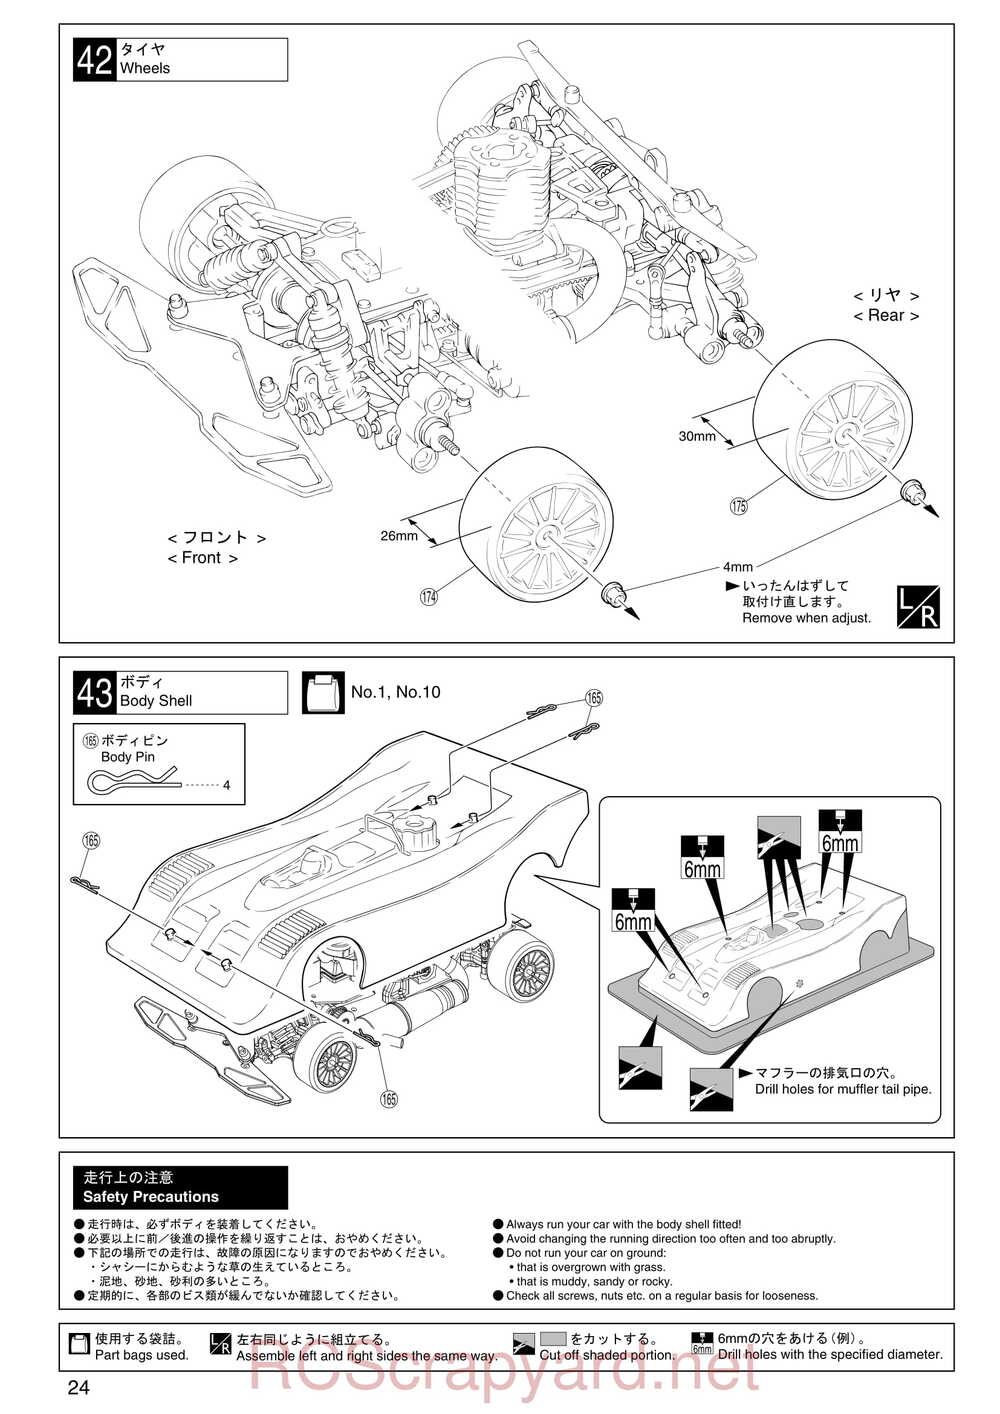 Kyosho - 31102 - V-One RR - Manual - Page 24